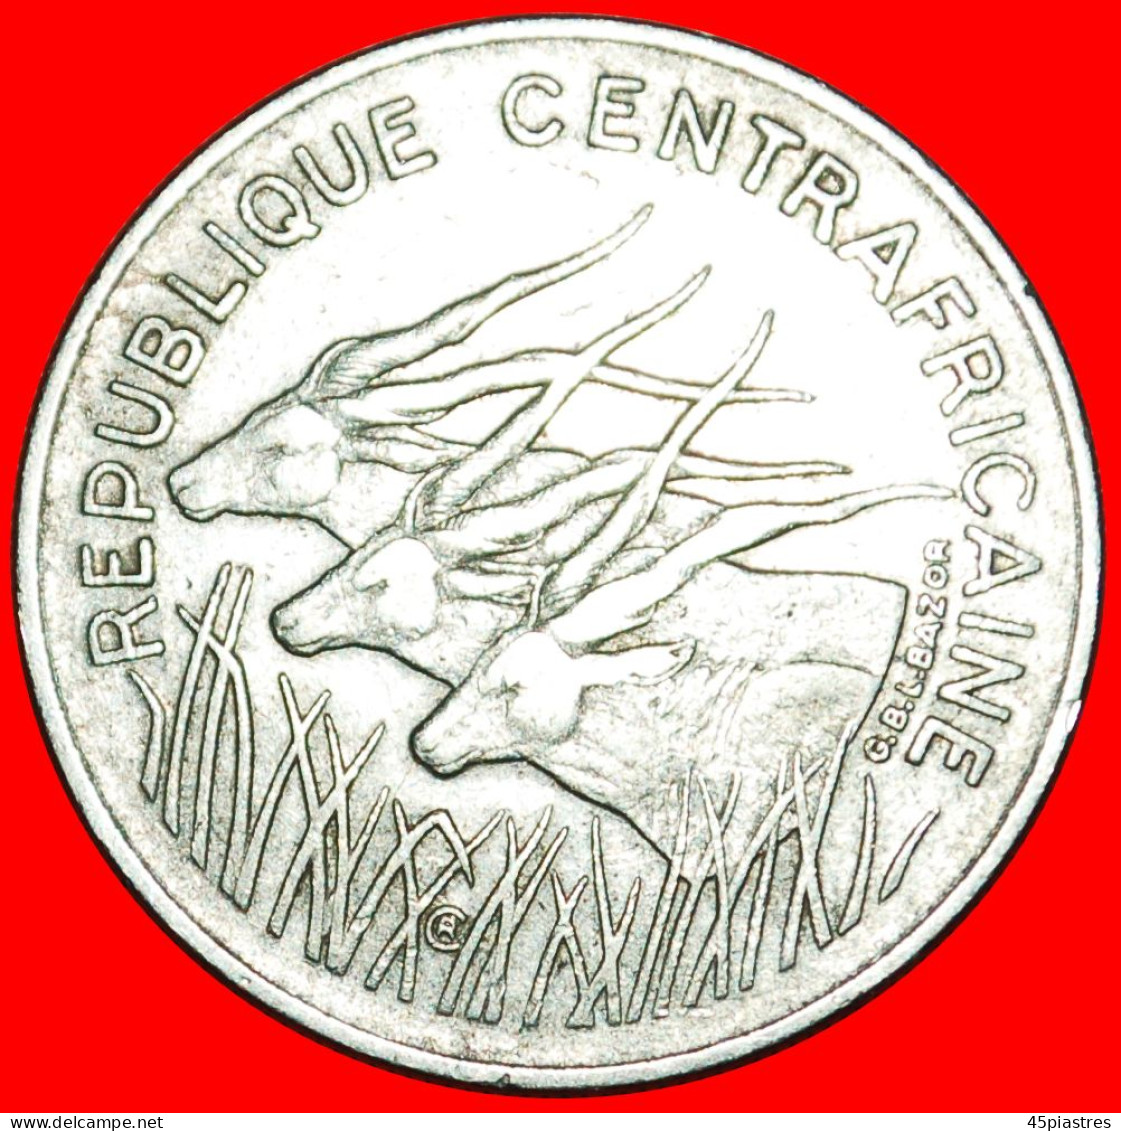 &#9733;ANTELOPES: CENTRAL AFRICAN REPUBLIC &#9733; 100 FRANCS 1976! LOW START&#9733;NO RESERVE! - Centraal-Afrikaanse Republiek